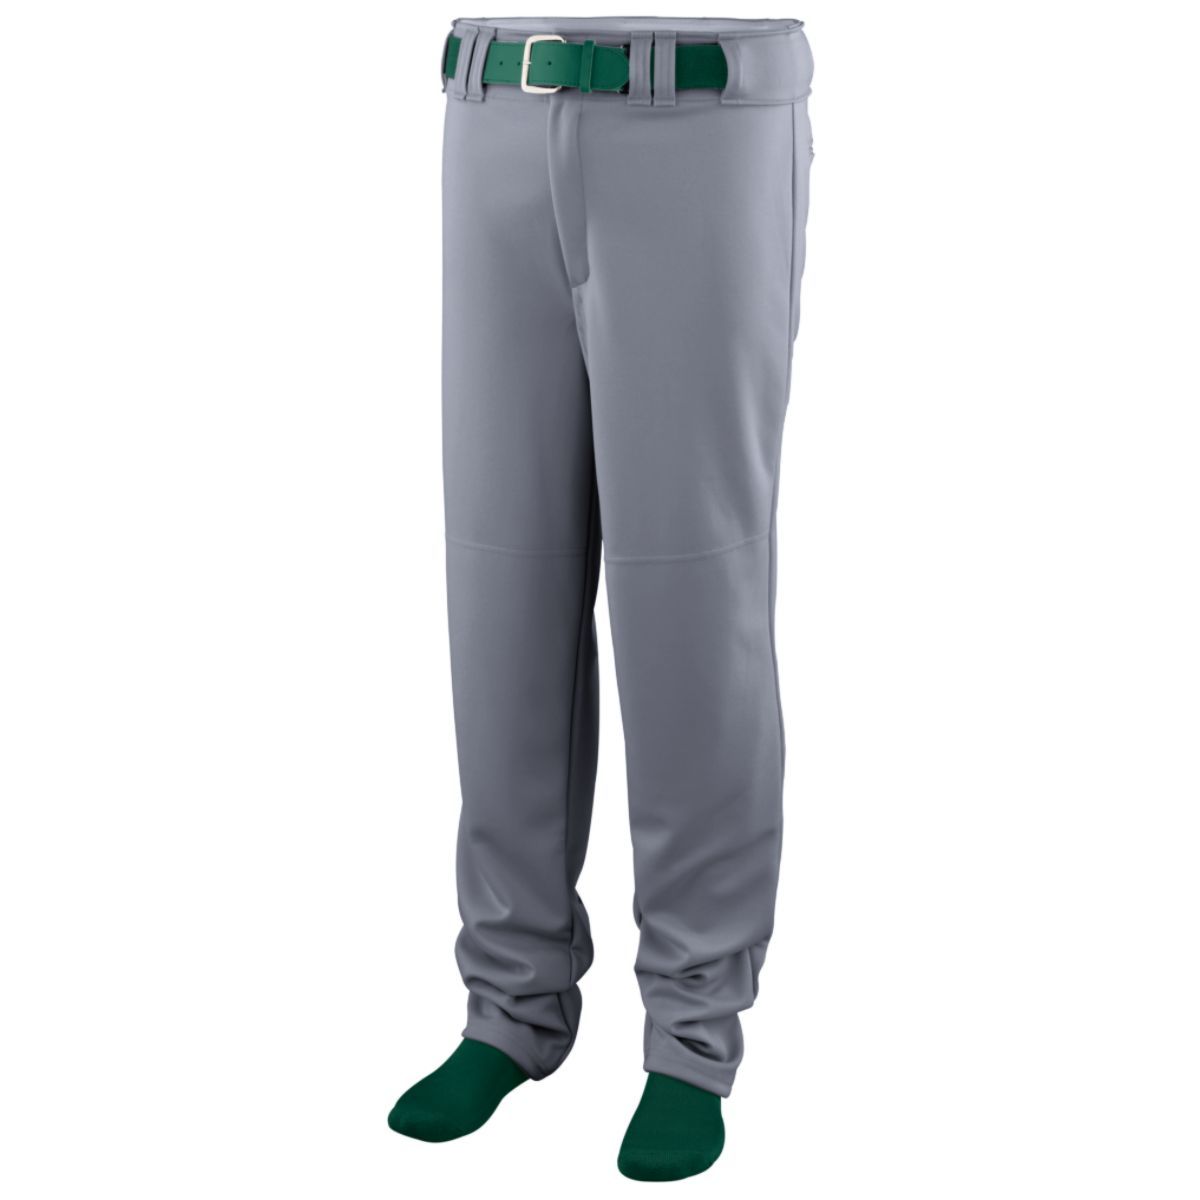 Augusta Sportswear Series Baseball/Softball Pant in Blue Grey  -Part of the Adult, Adult-Pants, Pants, Augusta-Products, Baseball, All-Sports, All-Sports-1 product lines at KanaleyCreations.com